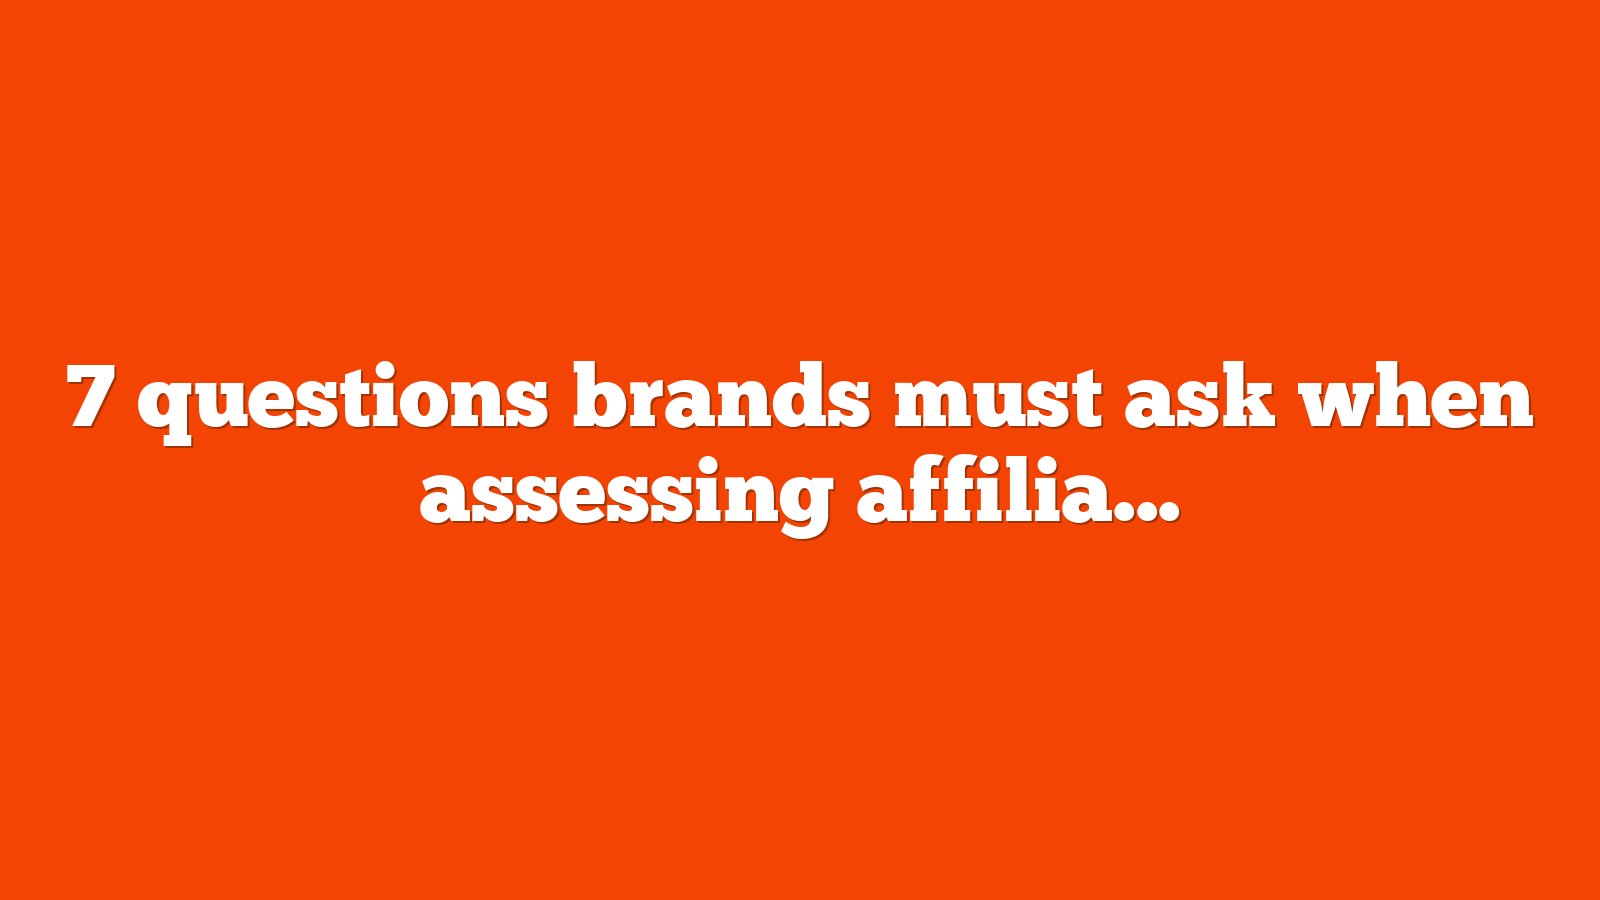 7 questions brands must ask when assessing affiliate agencies